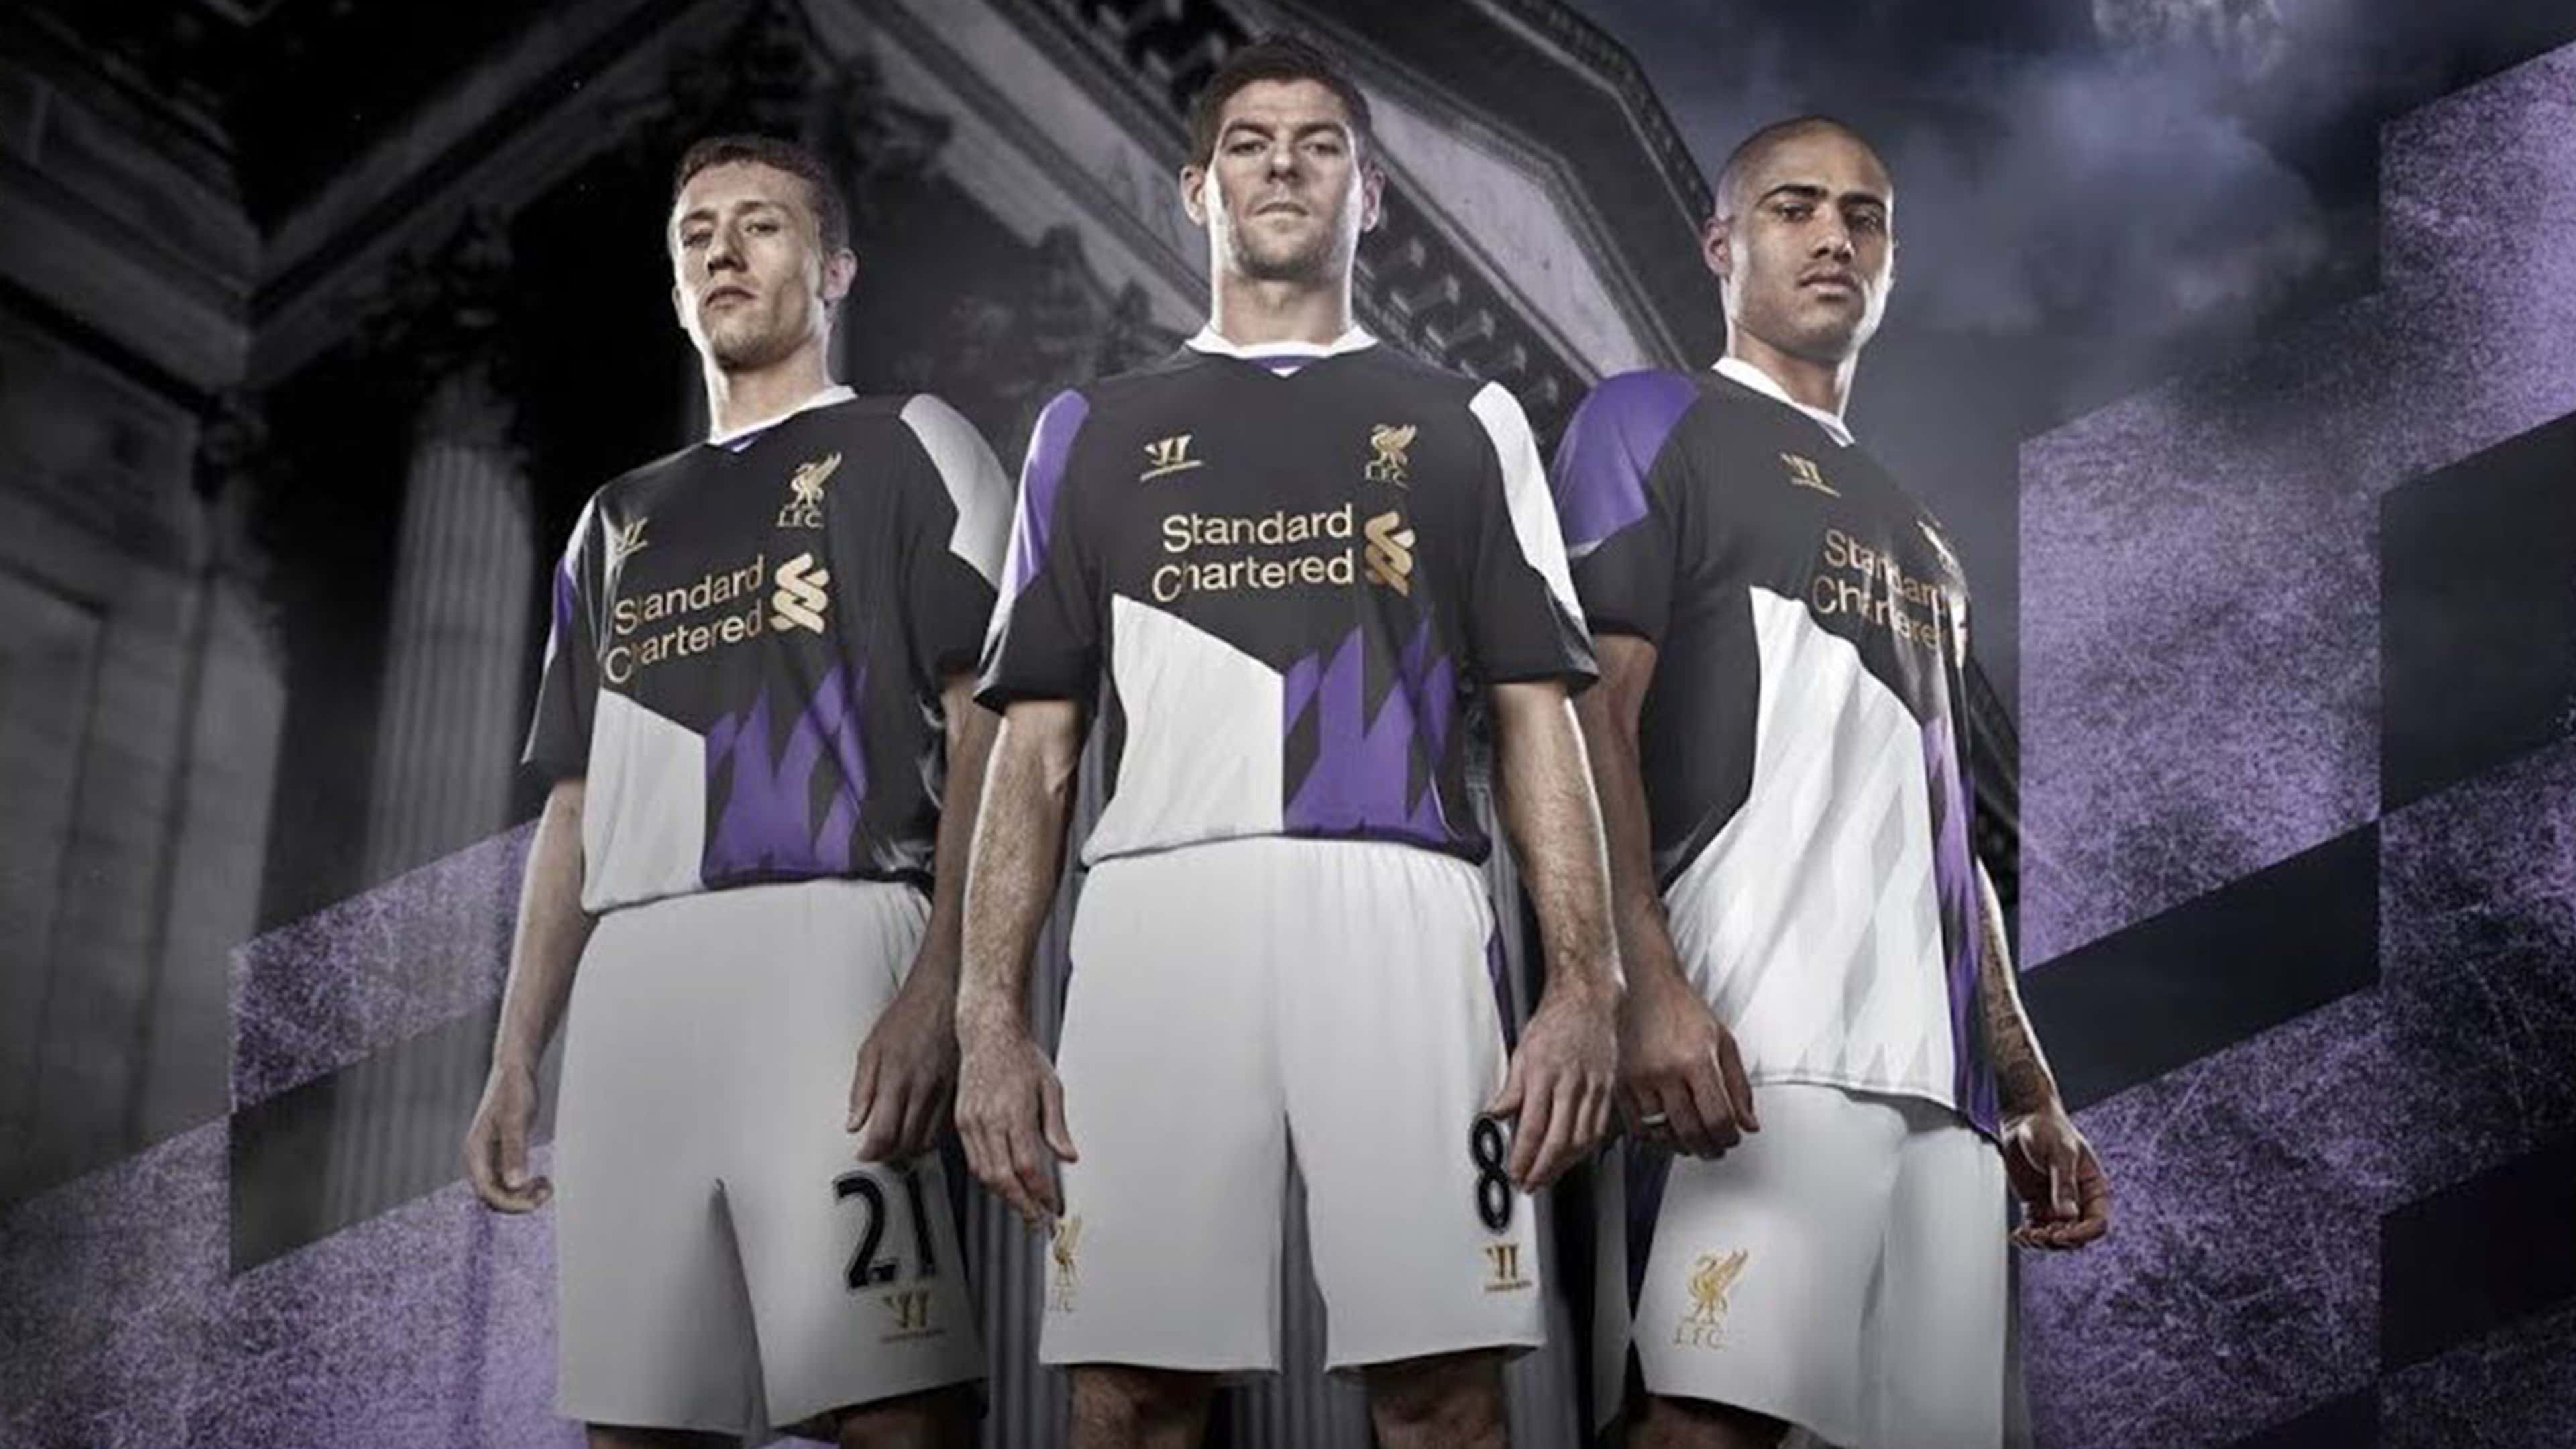 What we know about Liverpool's kits for 2023/24 - with 2 leaks